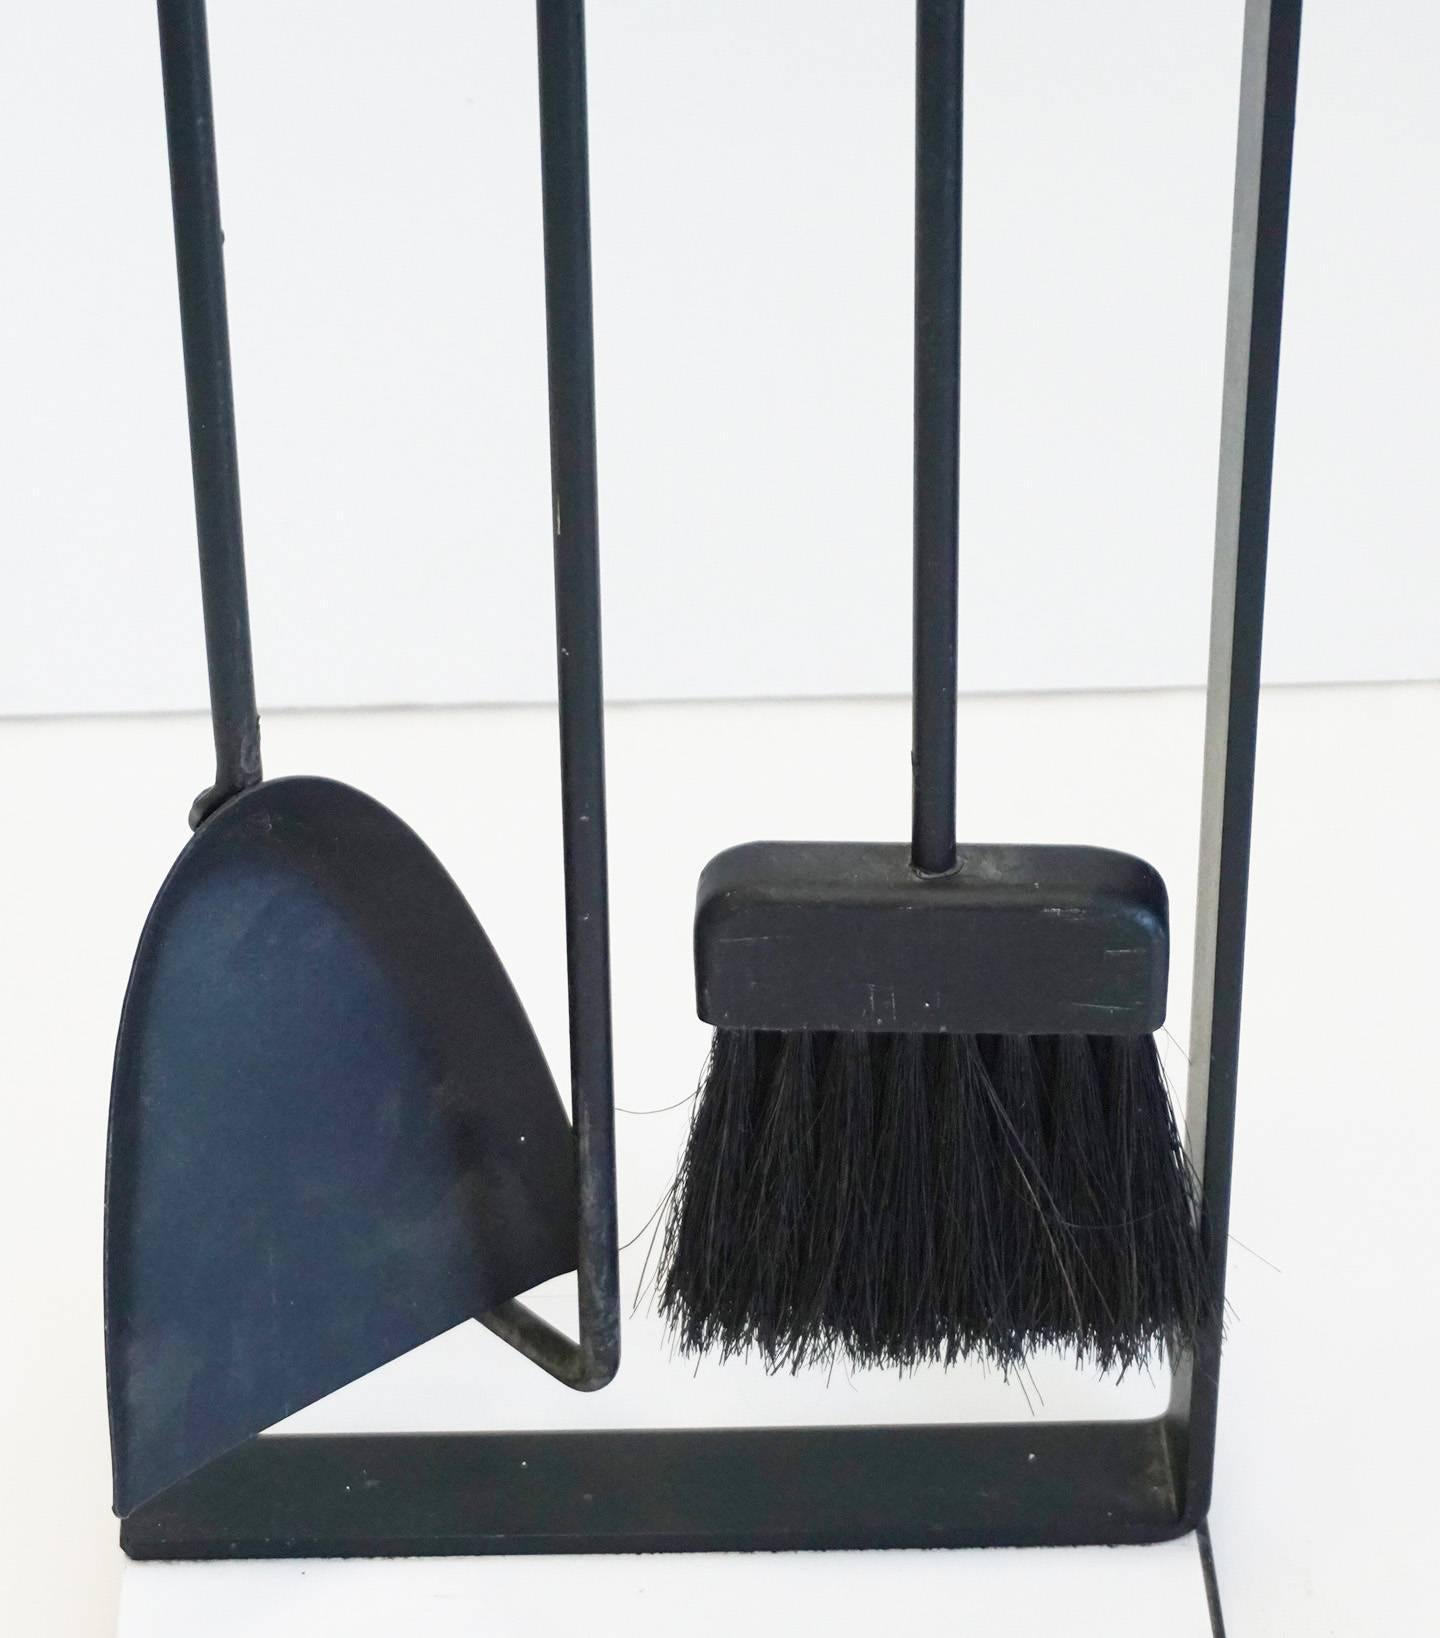 A neat and elegant fire tool set in enameled steel, aluminum and fiber. Comprising a poker, shovel, and brush suspended from a weighted cantilevered stand. Attributed to Pilgrim manufacturing, circa 1960s.
   
  
  